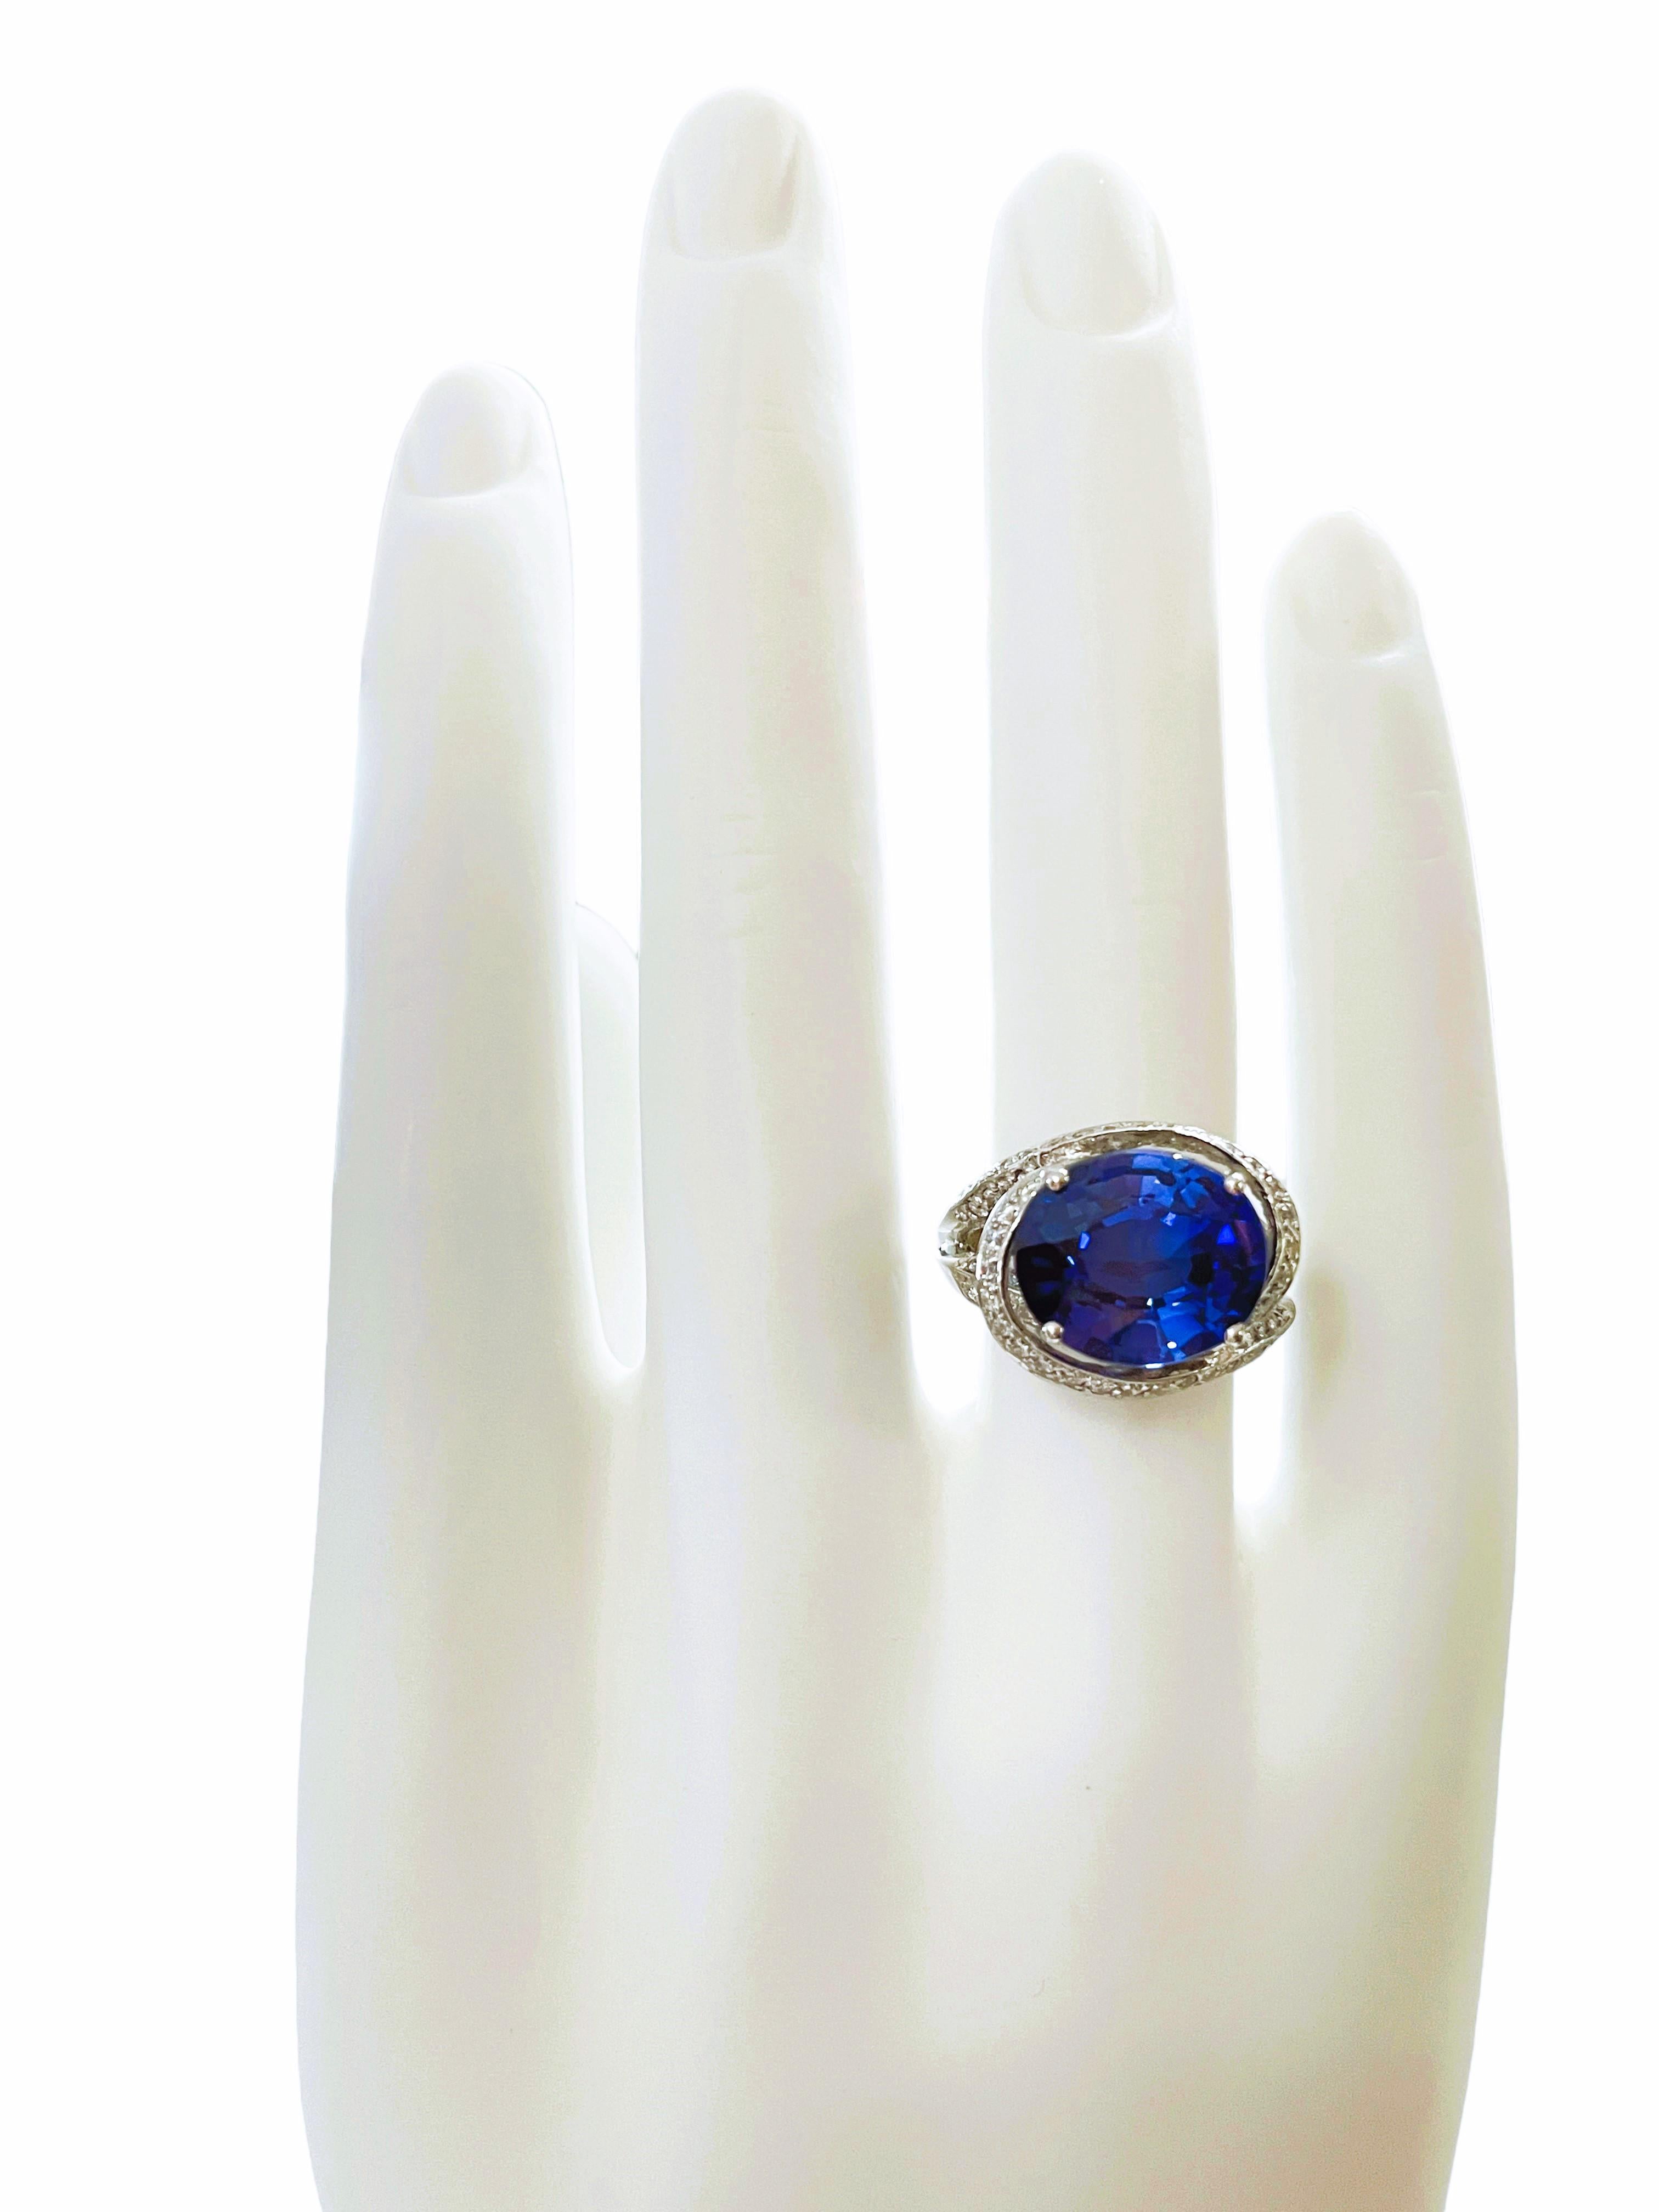 Oval Cut New African If 8.20 Carat Kashmir Blue & White Sapphire Sterling Ring